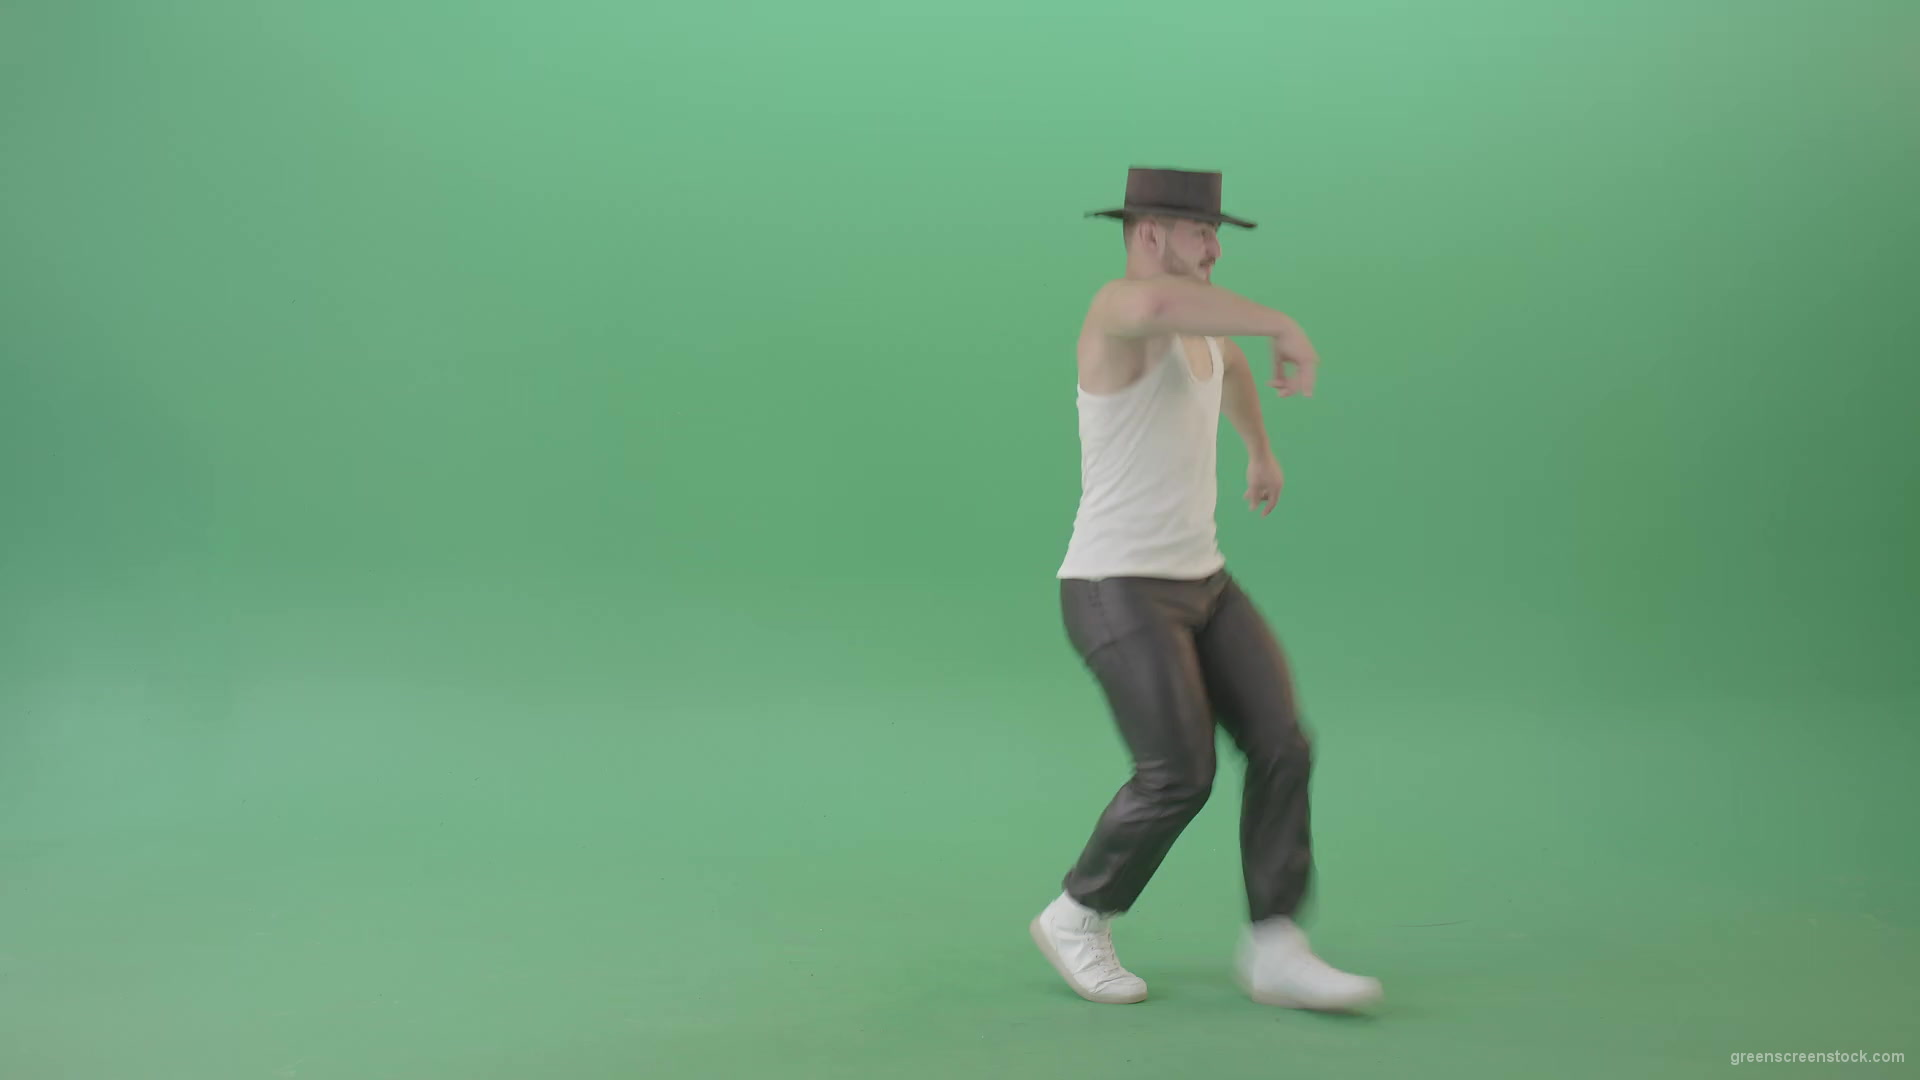 Adult-Man-makes-moonwalk-and-dancing-Pop-isolated-on-Green-Screen-4K-Video-Footage-1920_009 Green Screen Stock